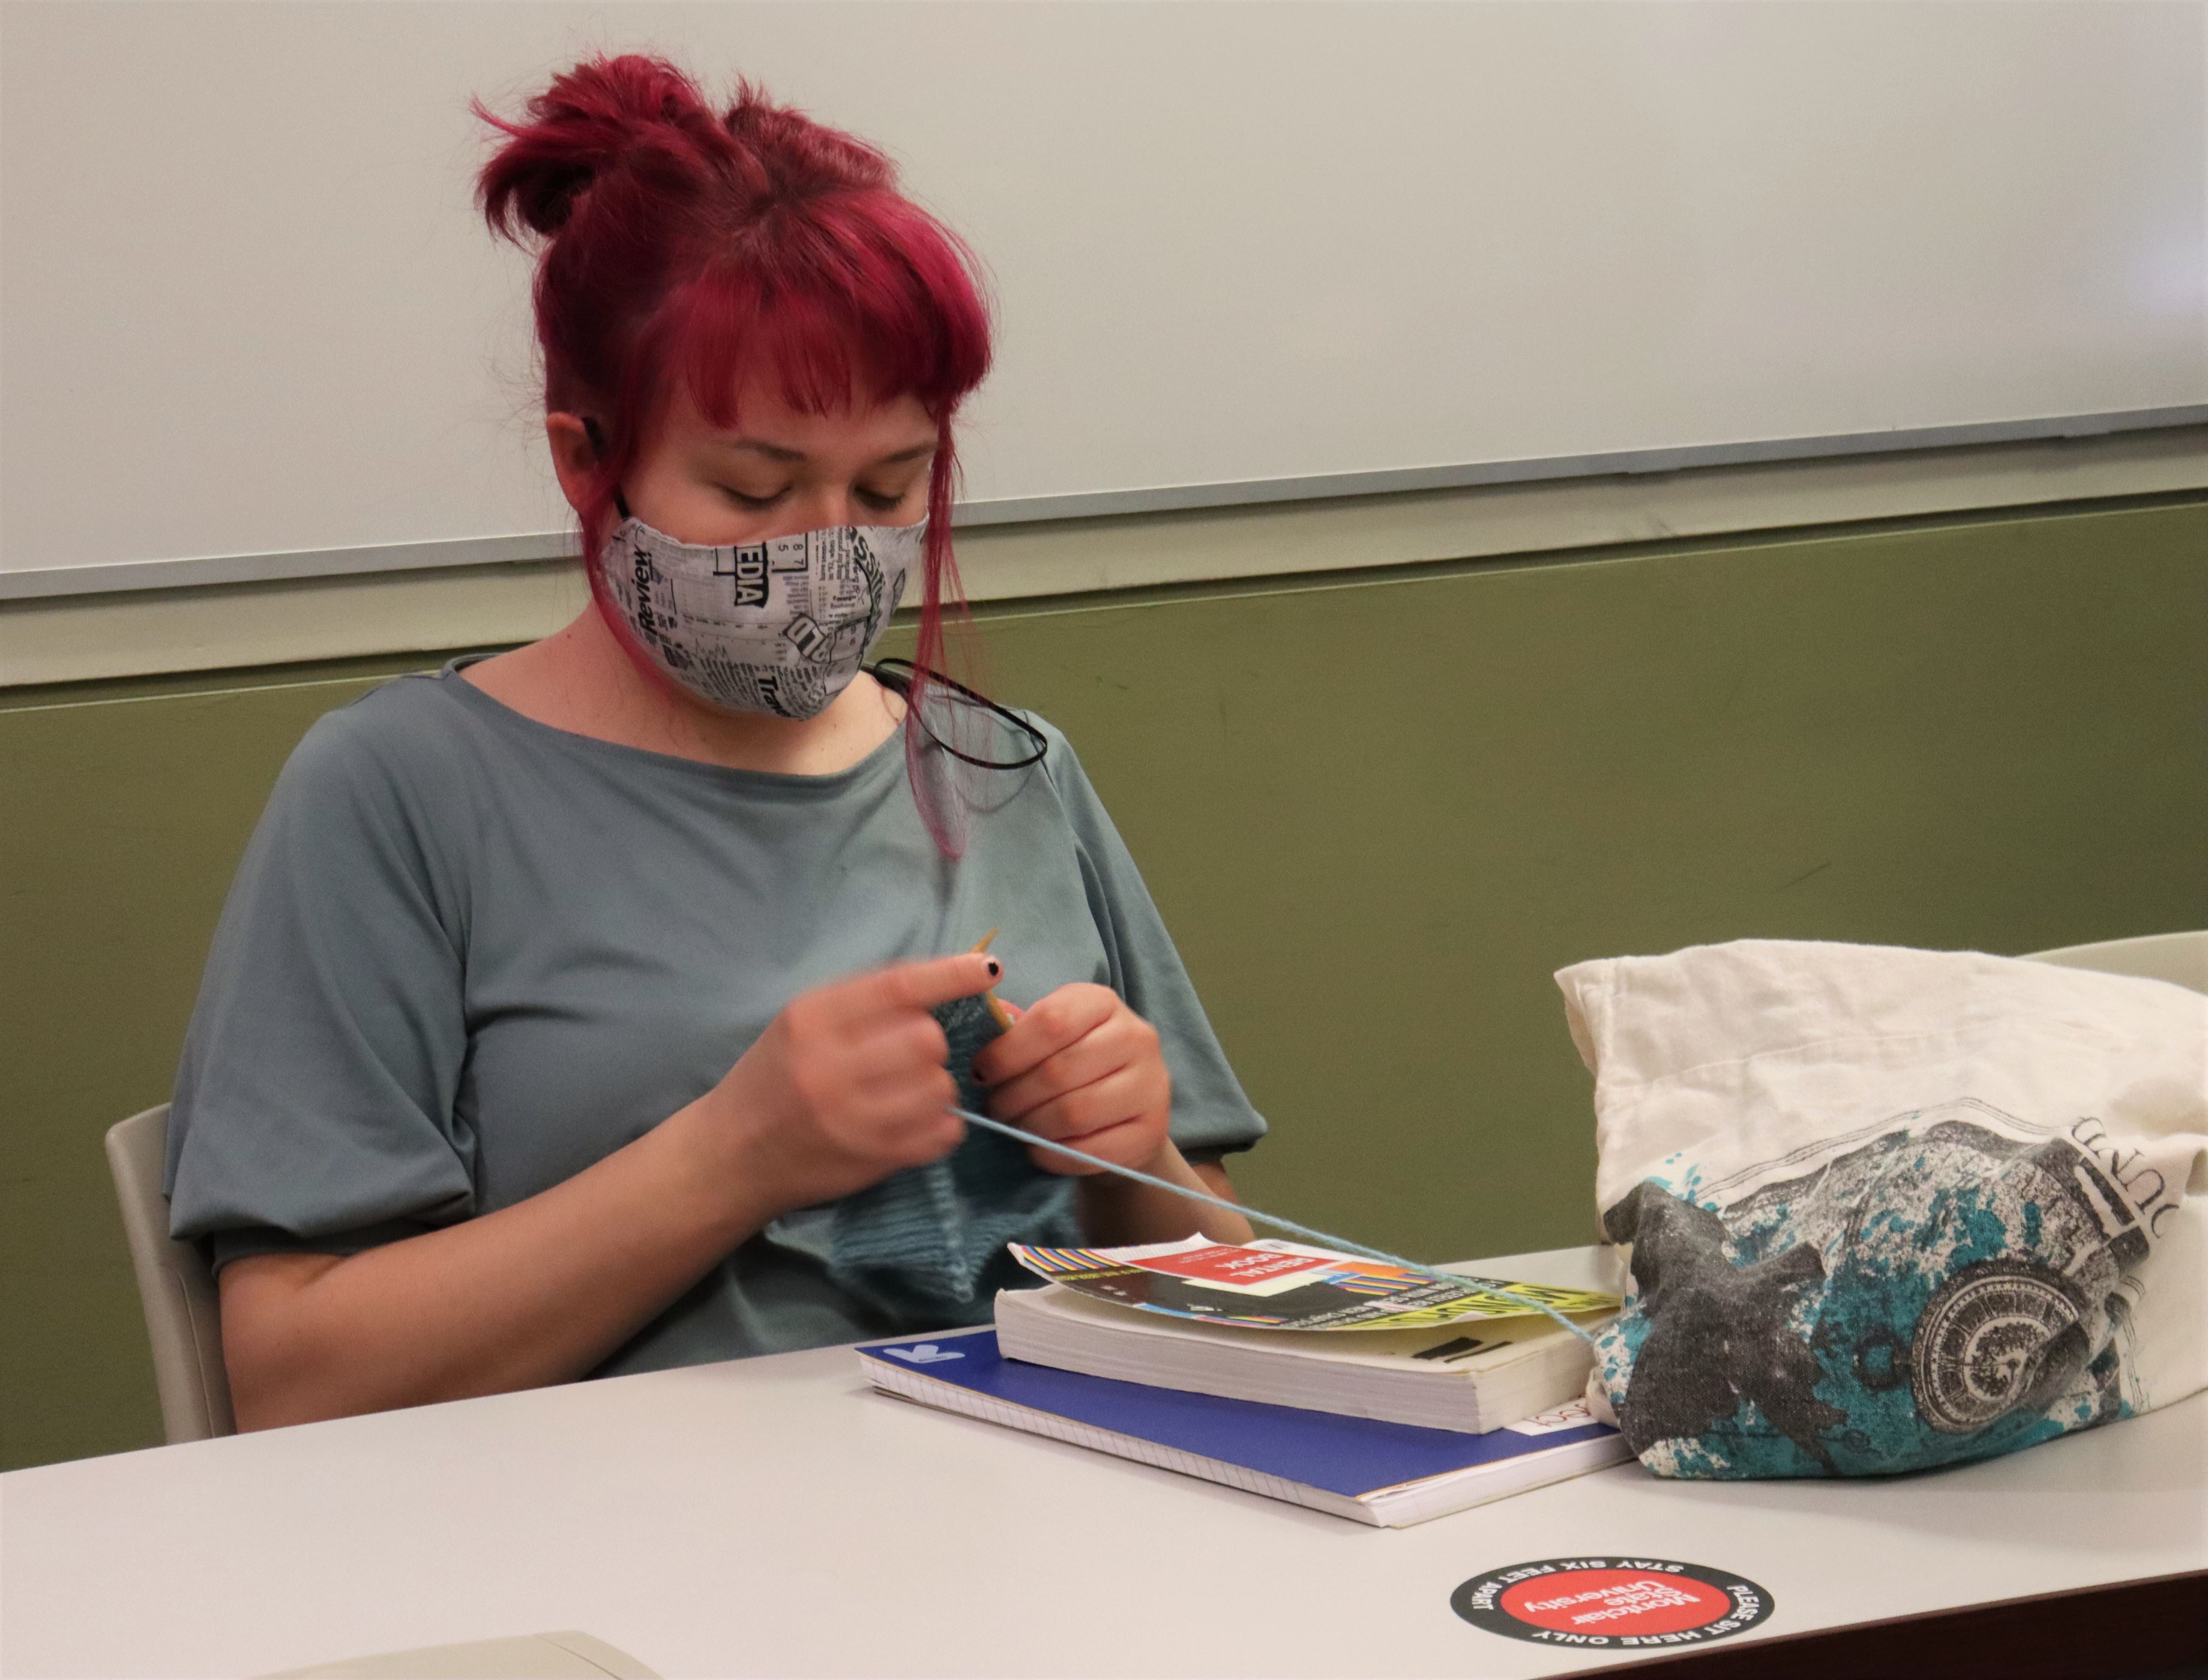 Carley Campbell, a sophomore journalism major, knits before class to help pass the time. John La Rosa | The Montclarion